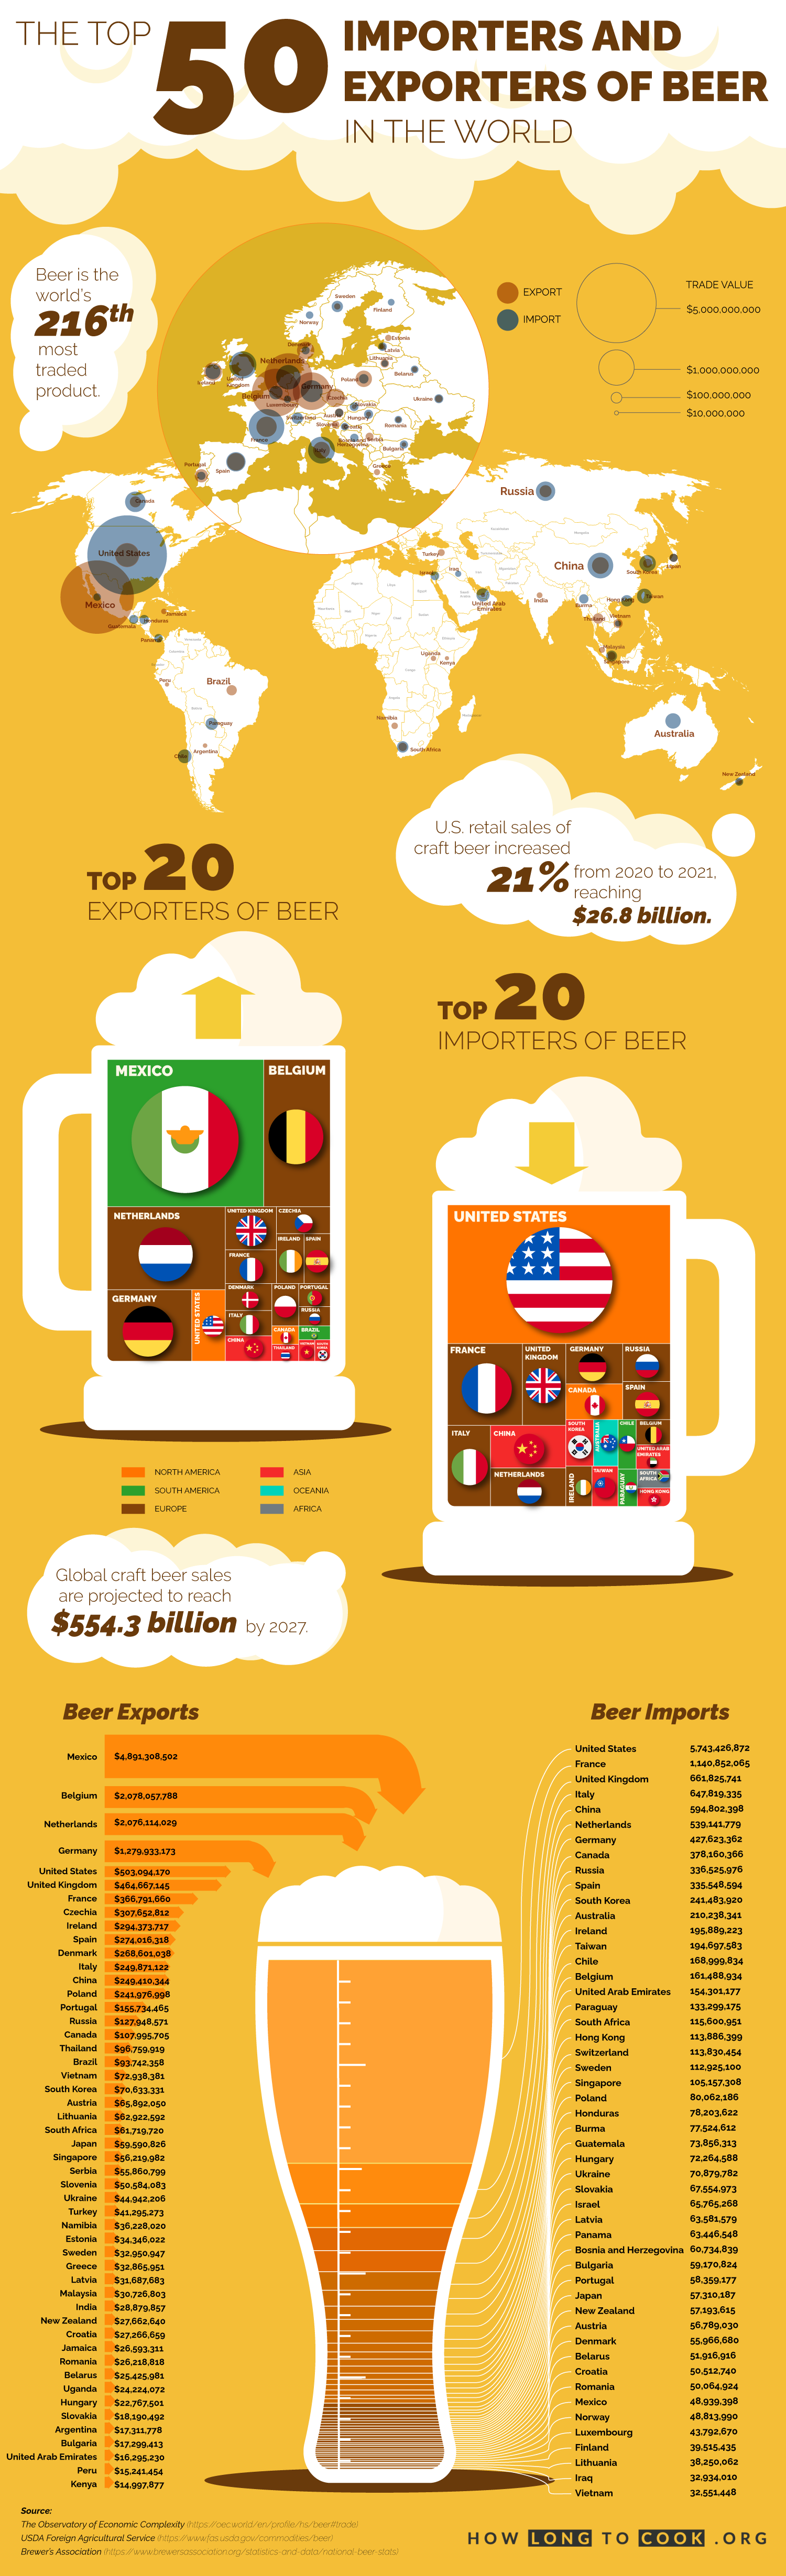 The Top 50 Importers and Exporters of Beer in the World